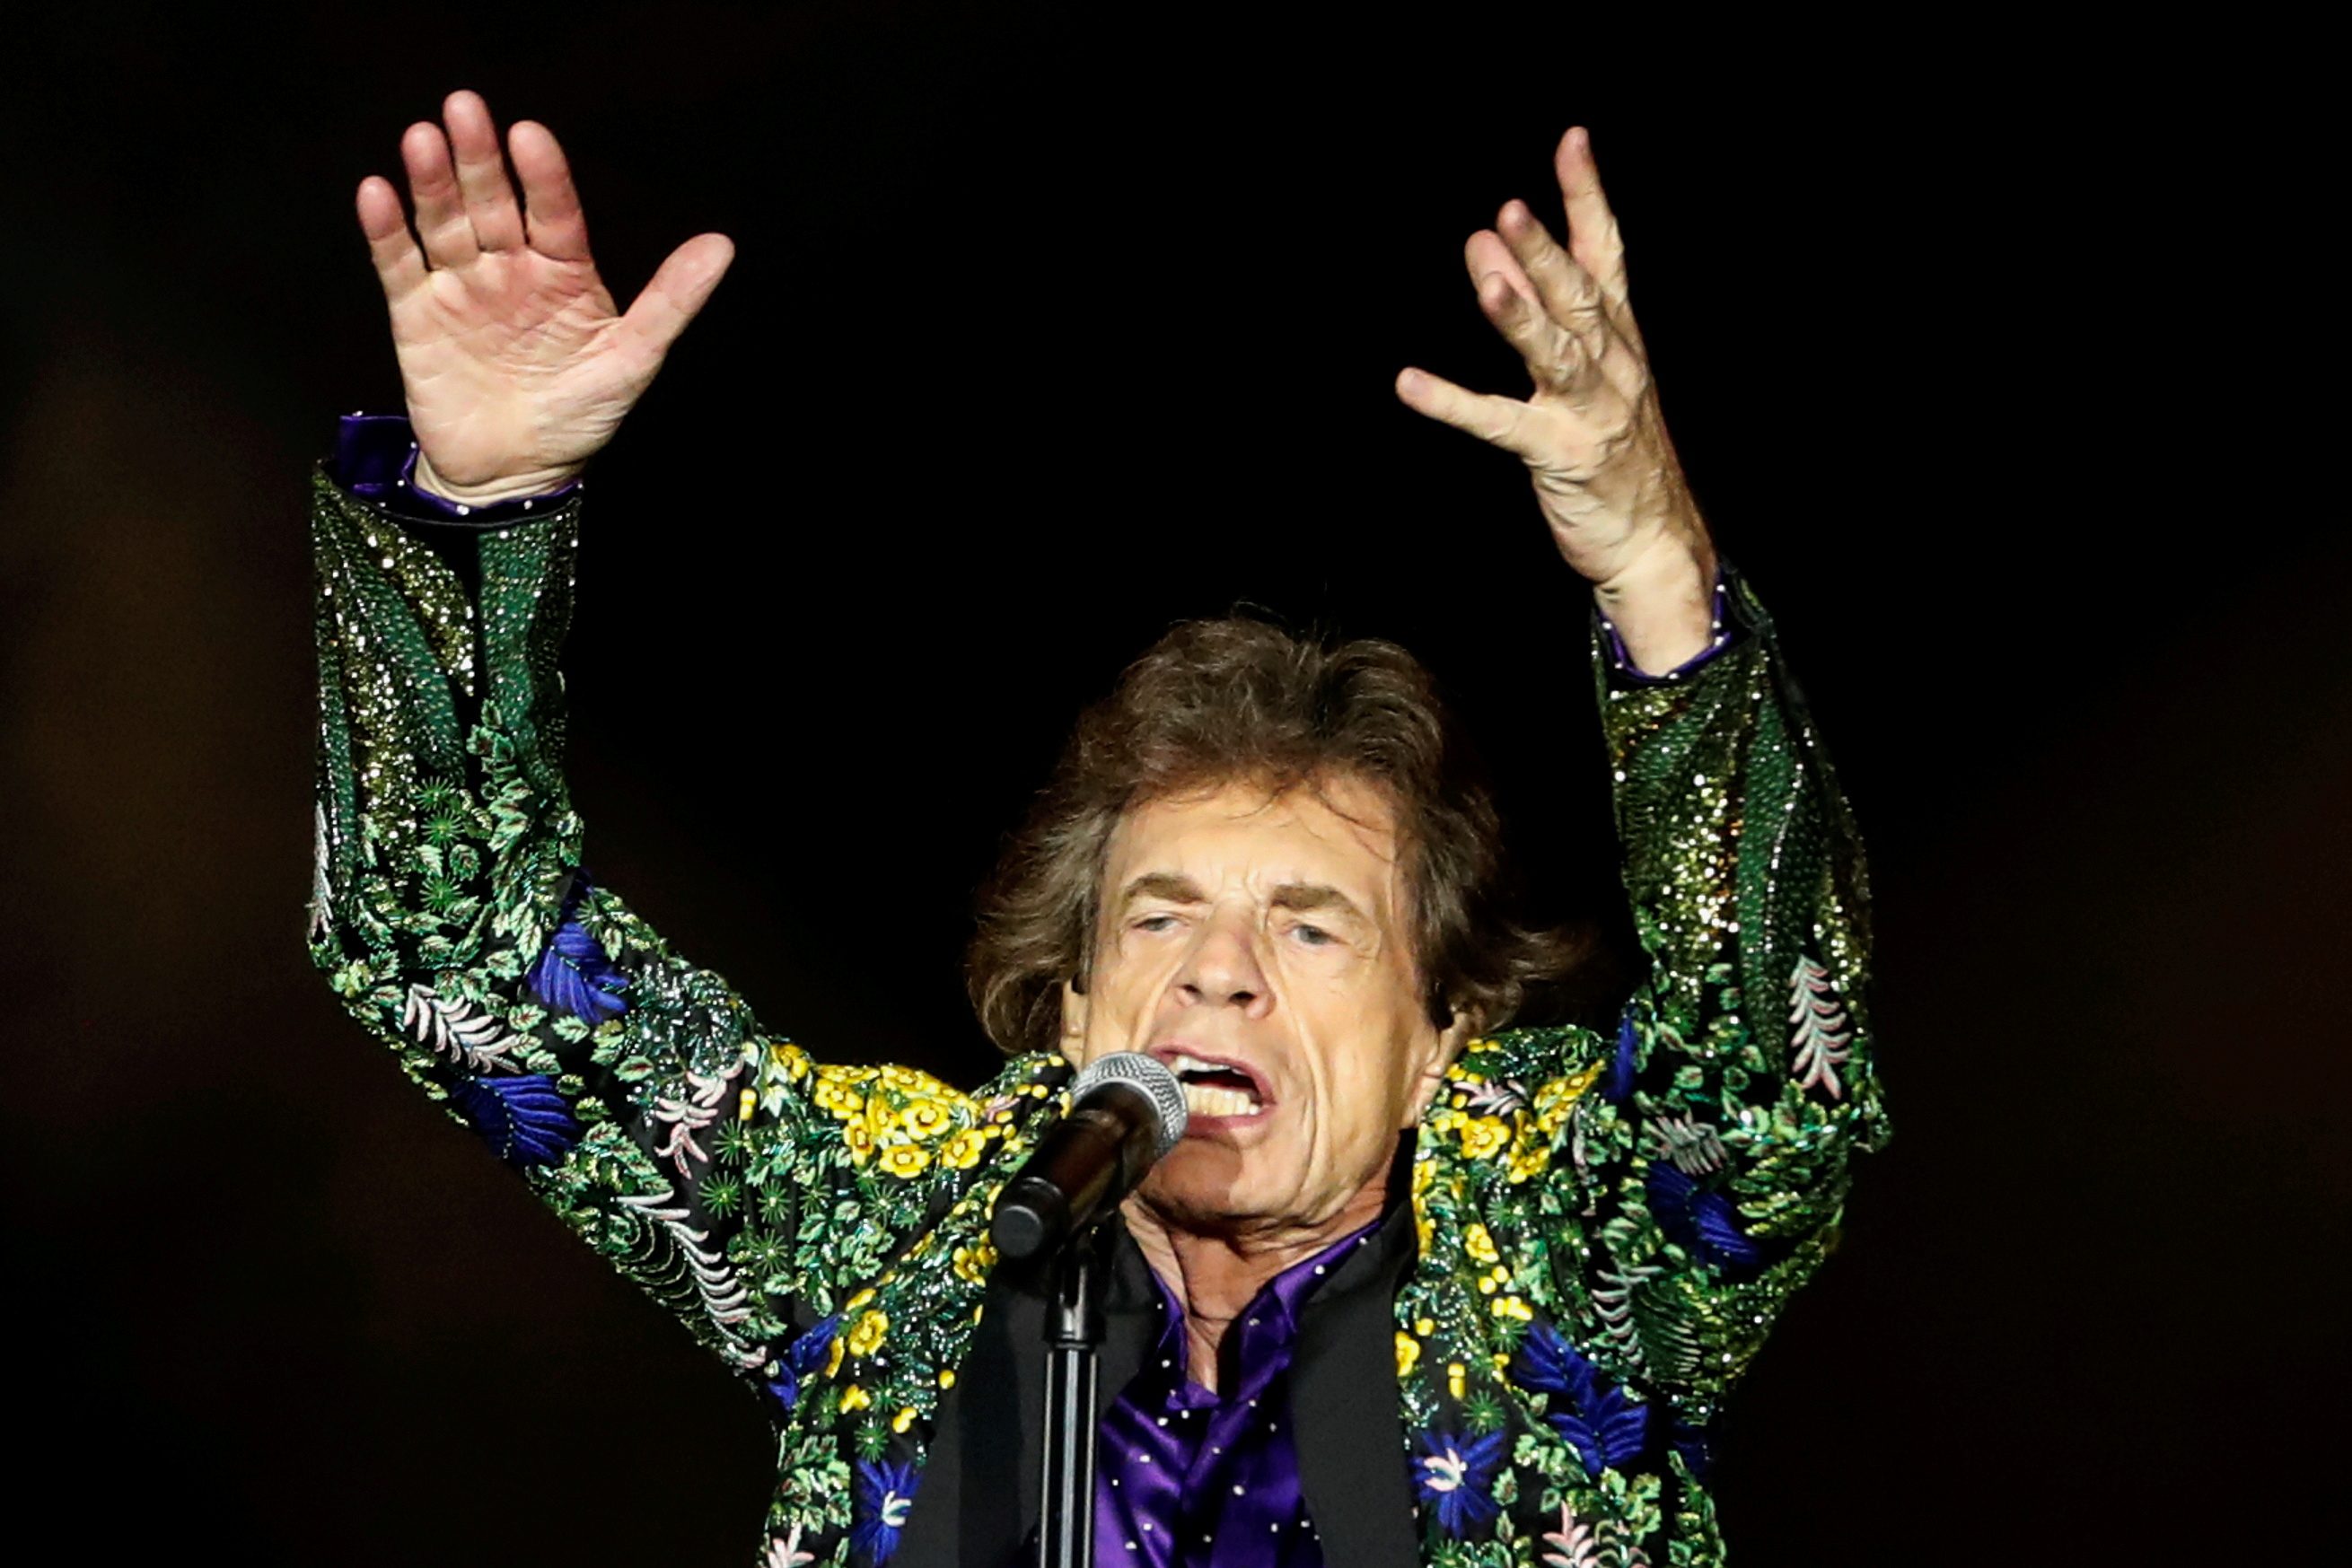 Mick Jagger celebrates end of lockdown in new track ‘Eazy Sleazy’